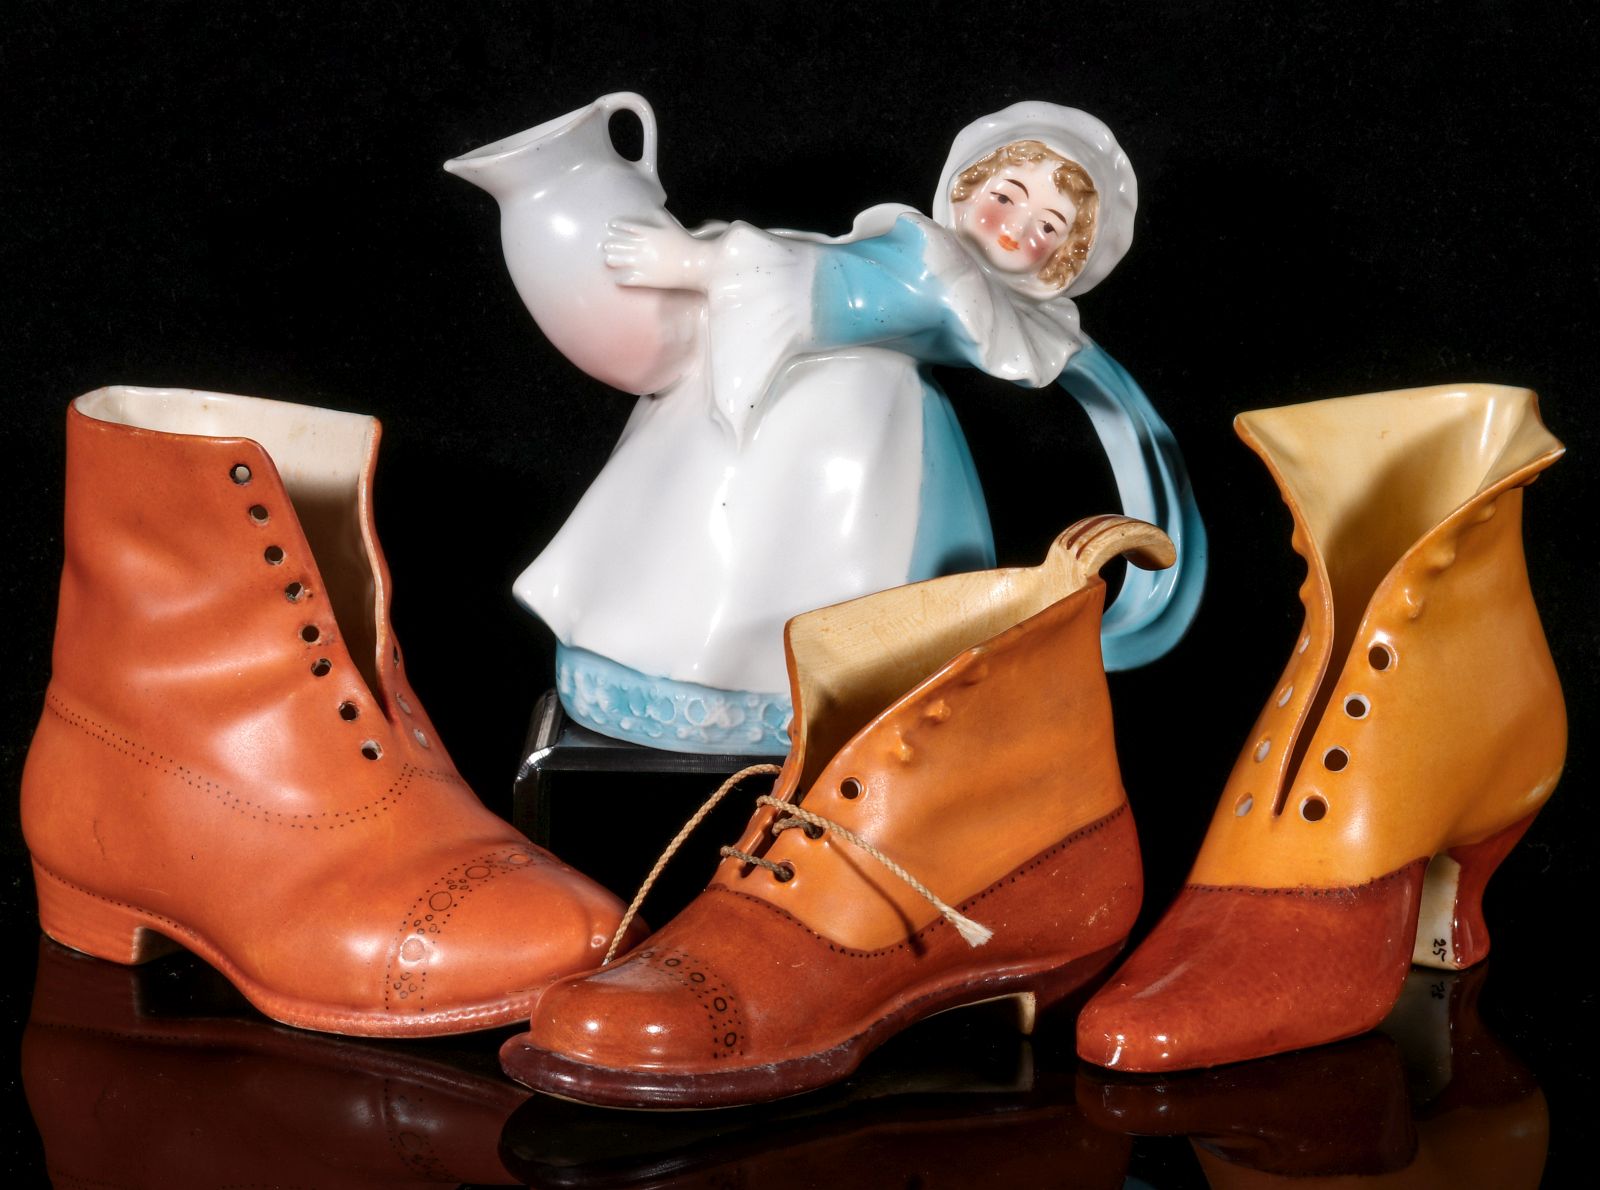 A COLLECTION OF ROYAL BAYREUTH FIGURAL PORCELAIN